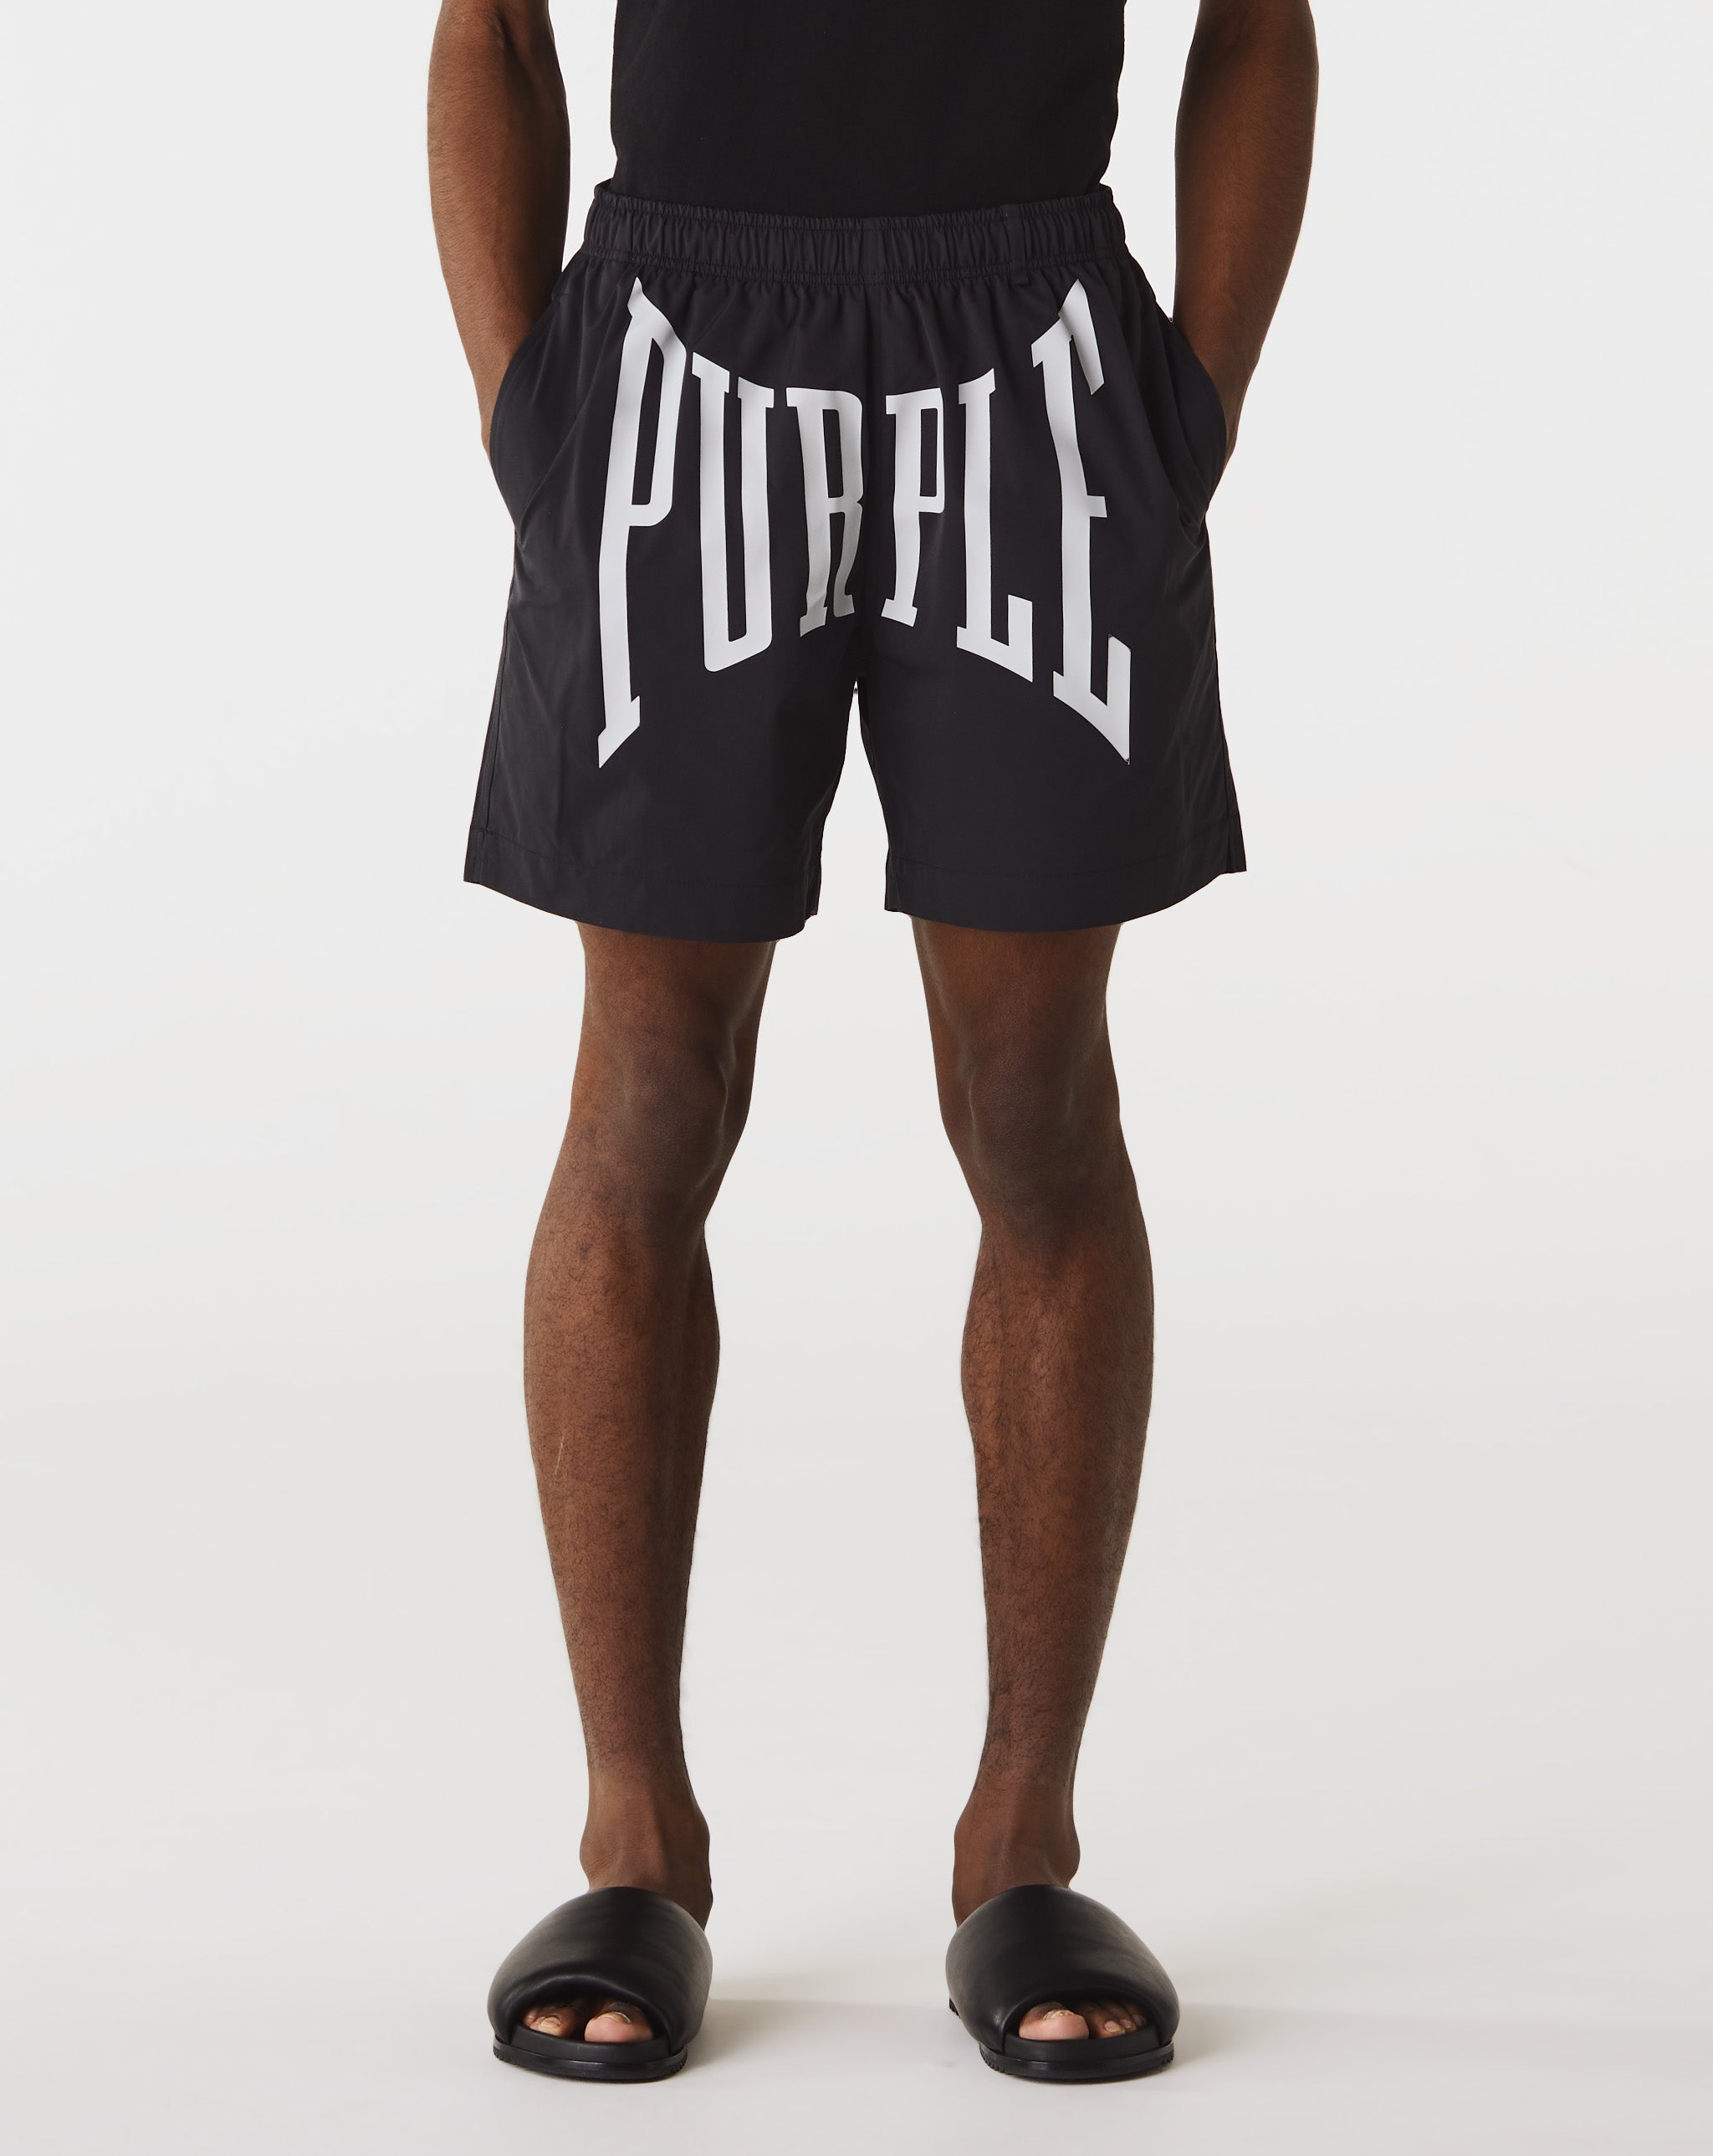 Purple Brand All Round Shorts  - Cheap Cerbe Jordan outlet